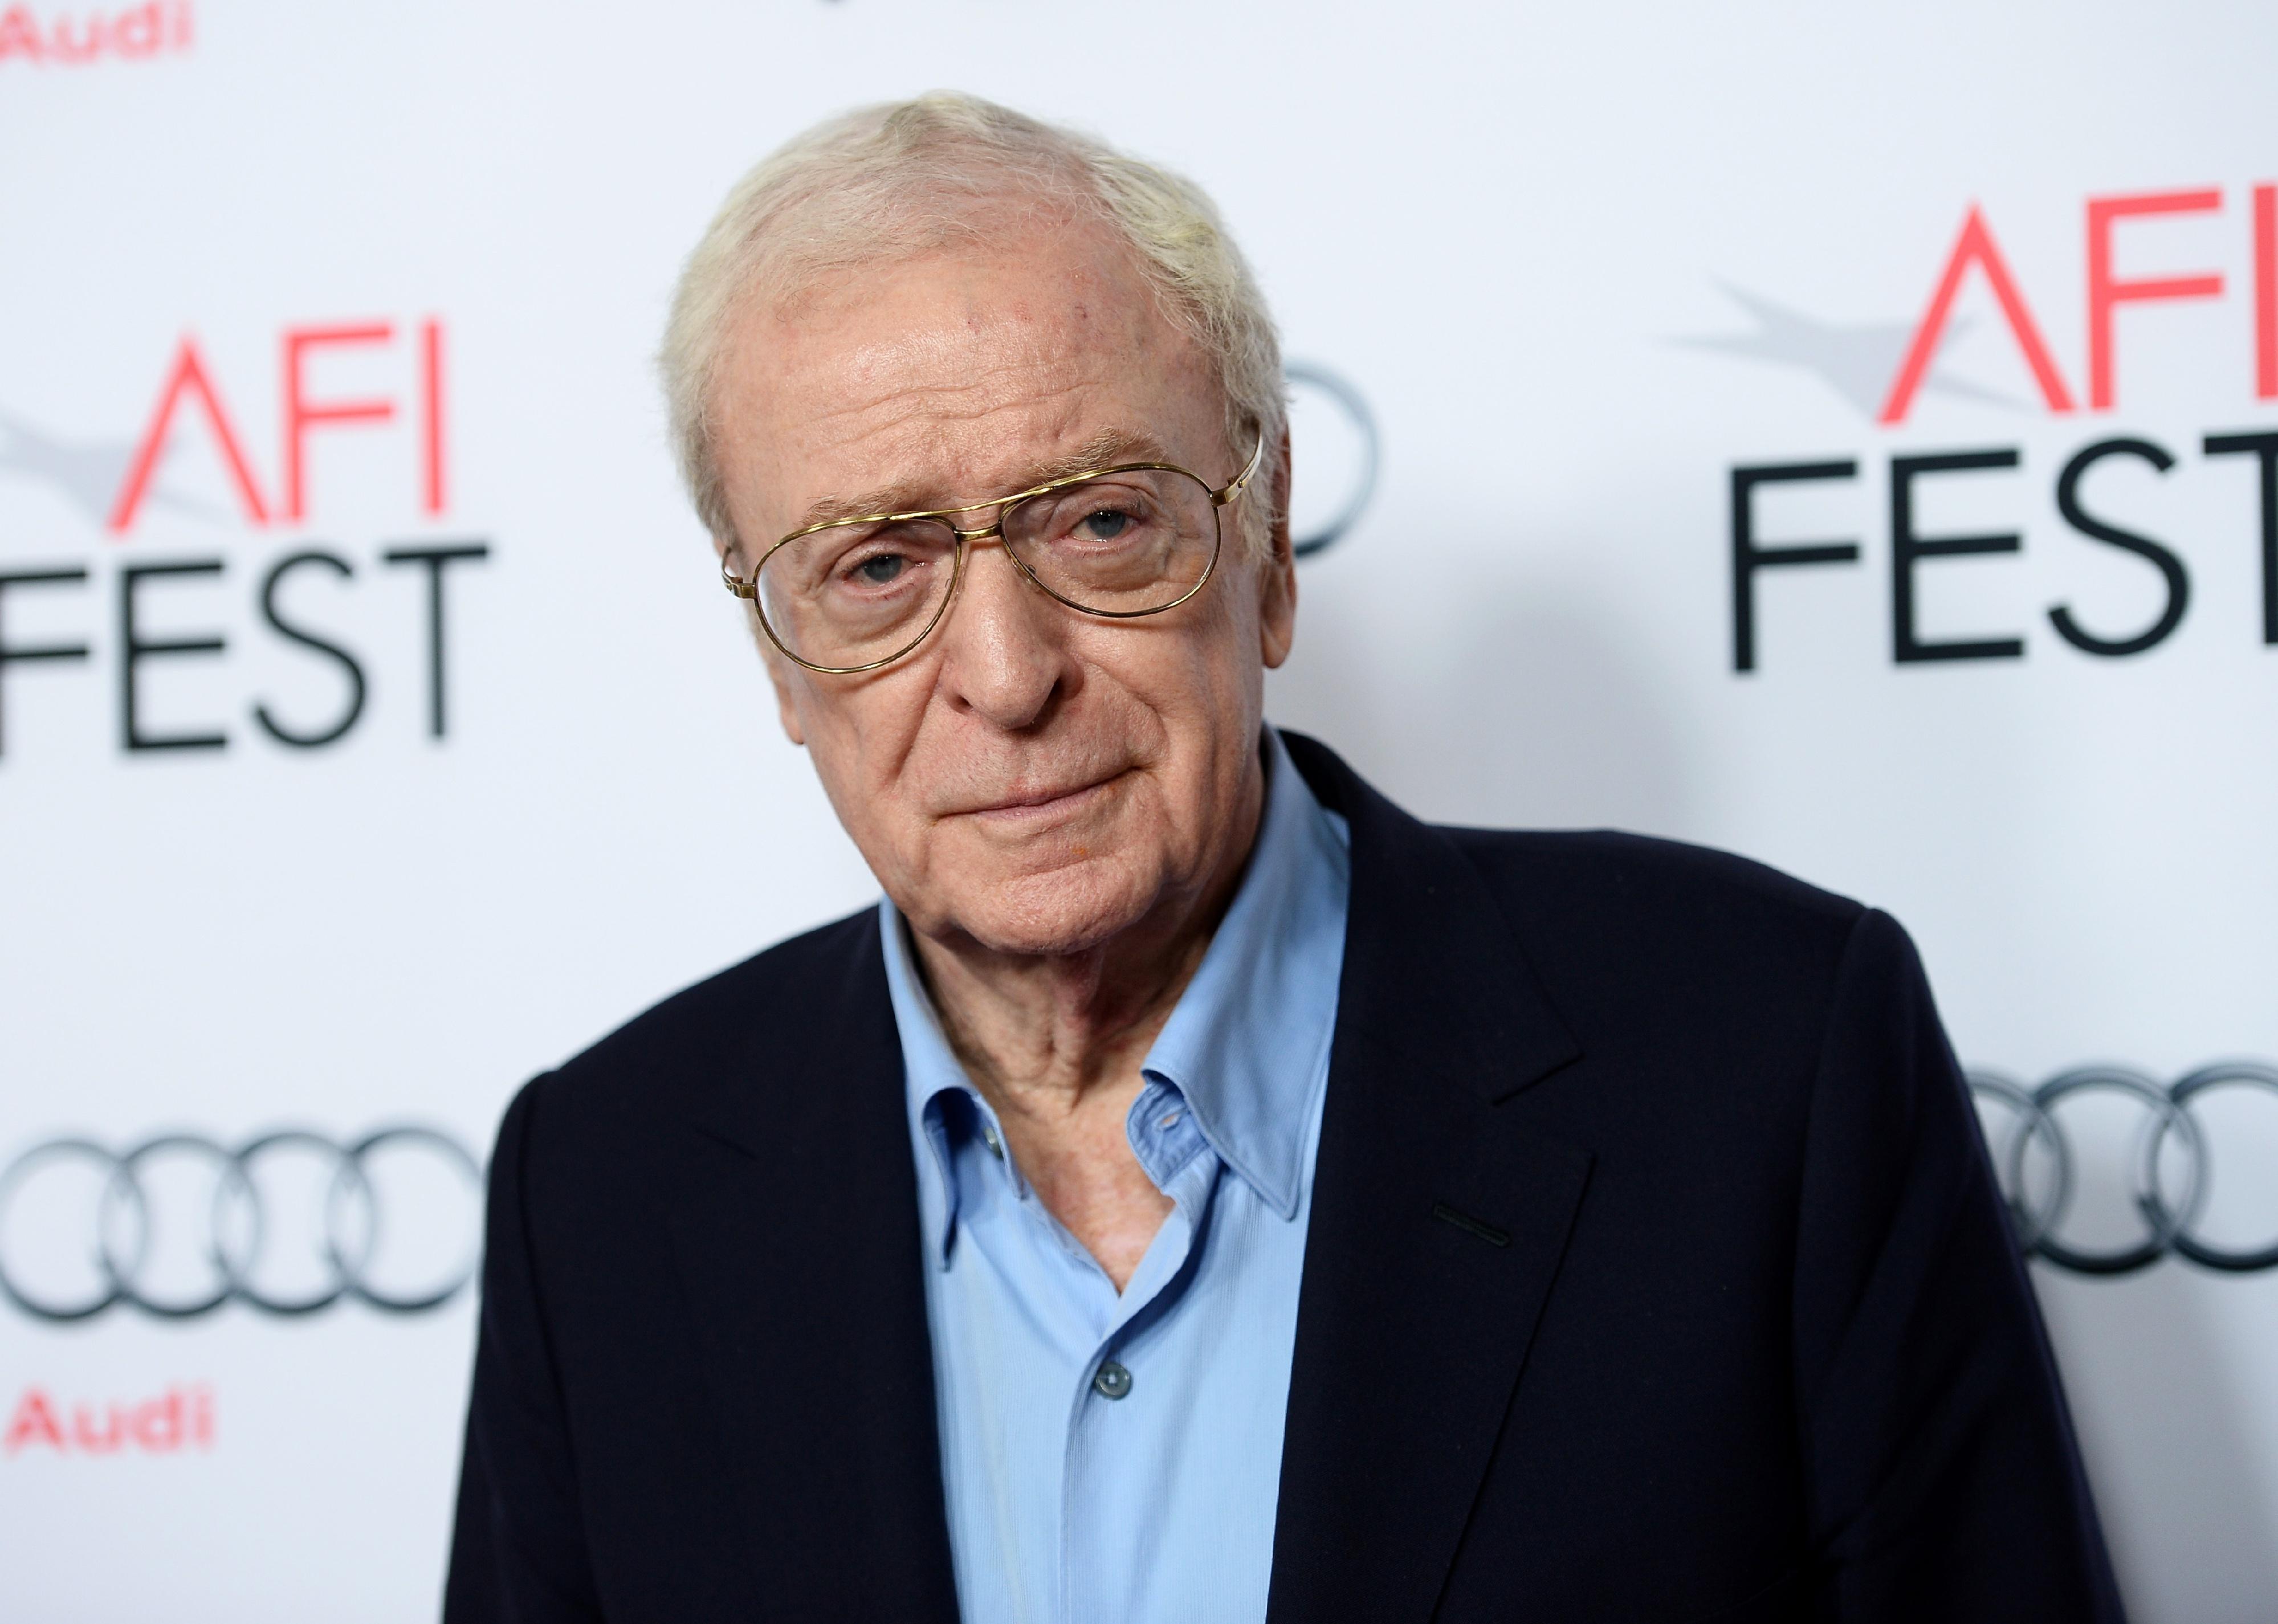 Michael Caine in a blue shirt and black jacket.